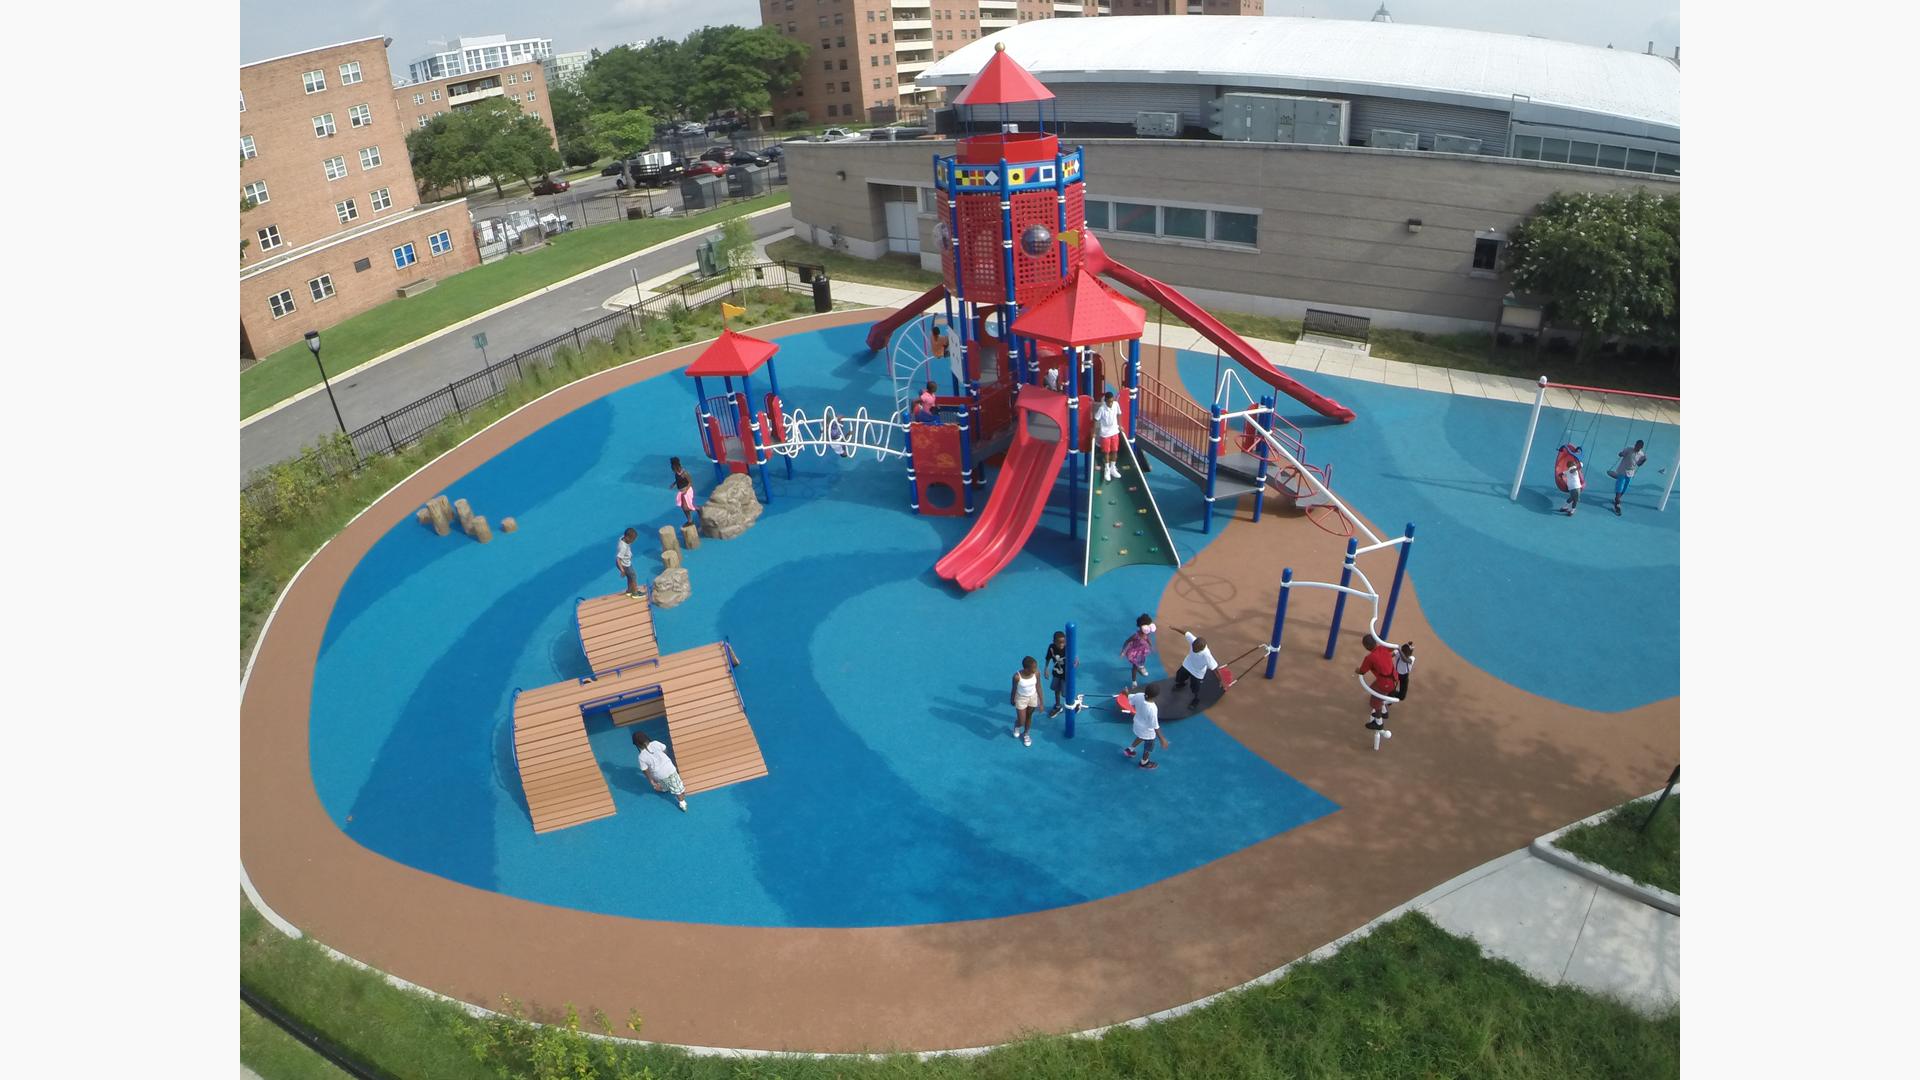 Aerial view of a red light-house themed playground with children playing. Surfacing mimics blue water and brown sand with buildings in the background. 